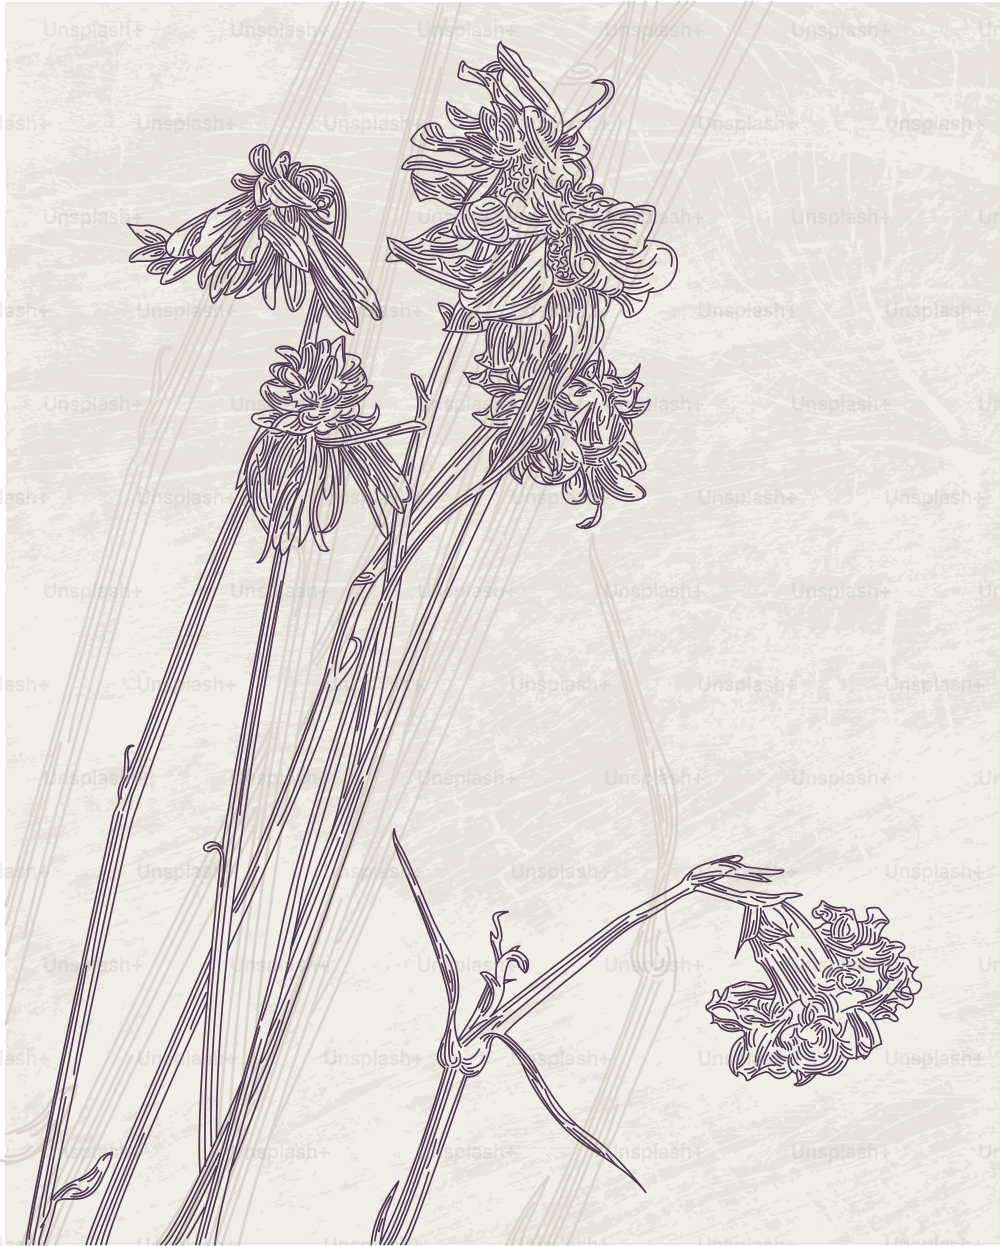 An antique-styled drawing of some dead, dried flowers.